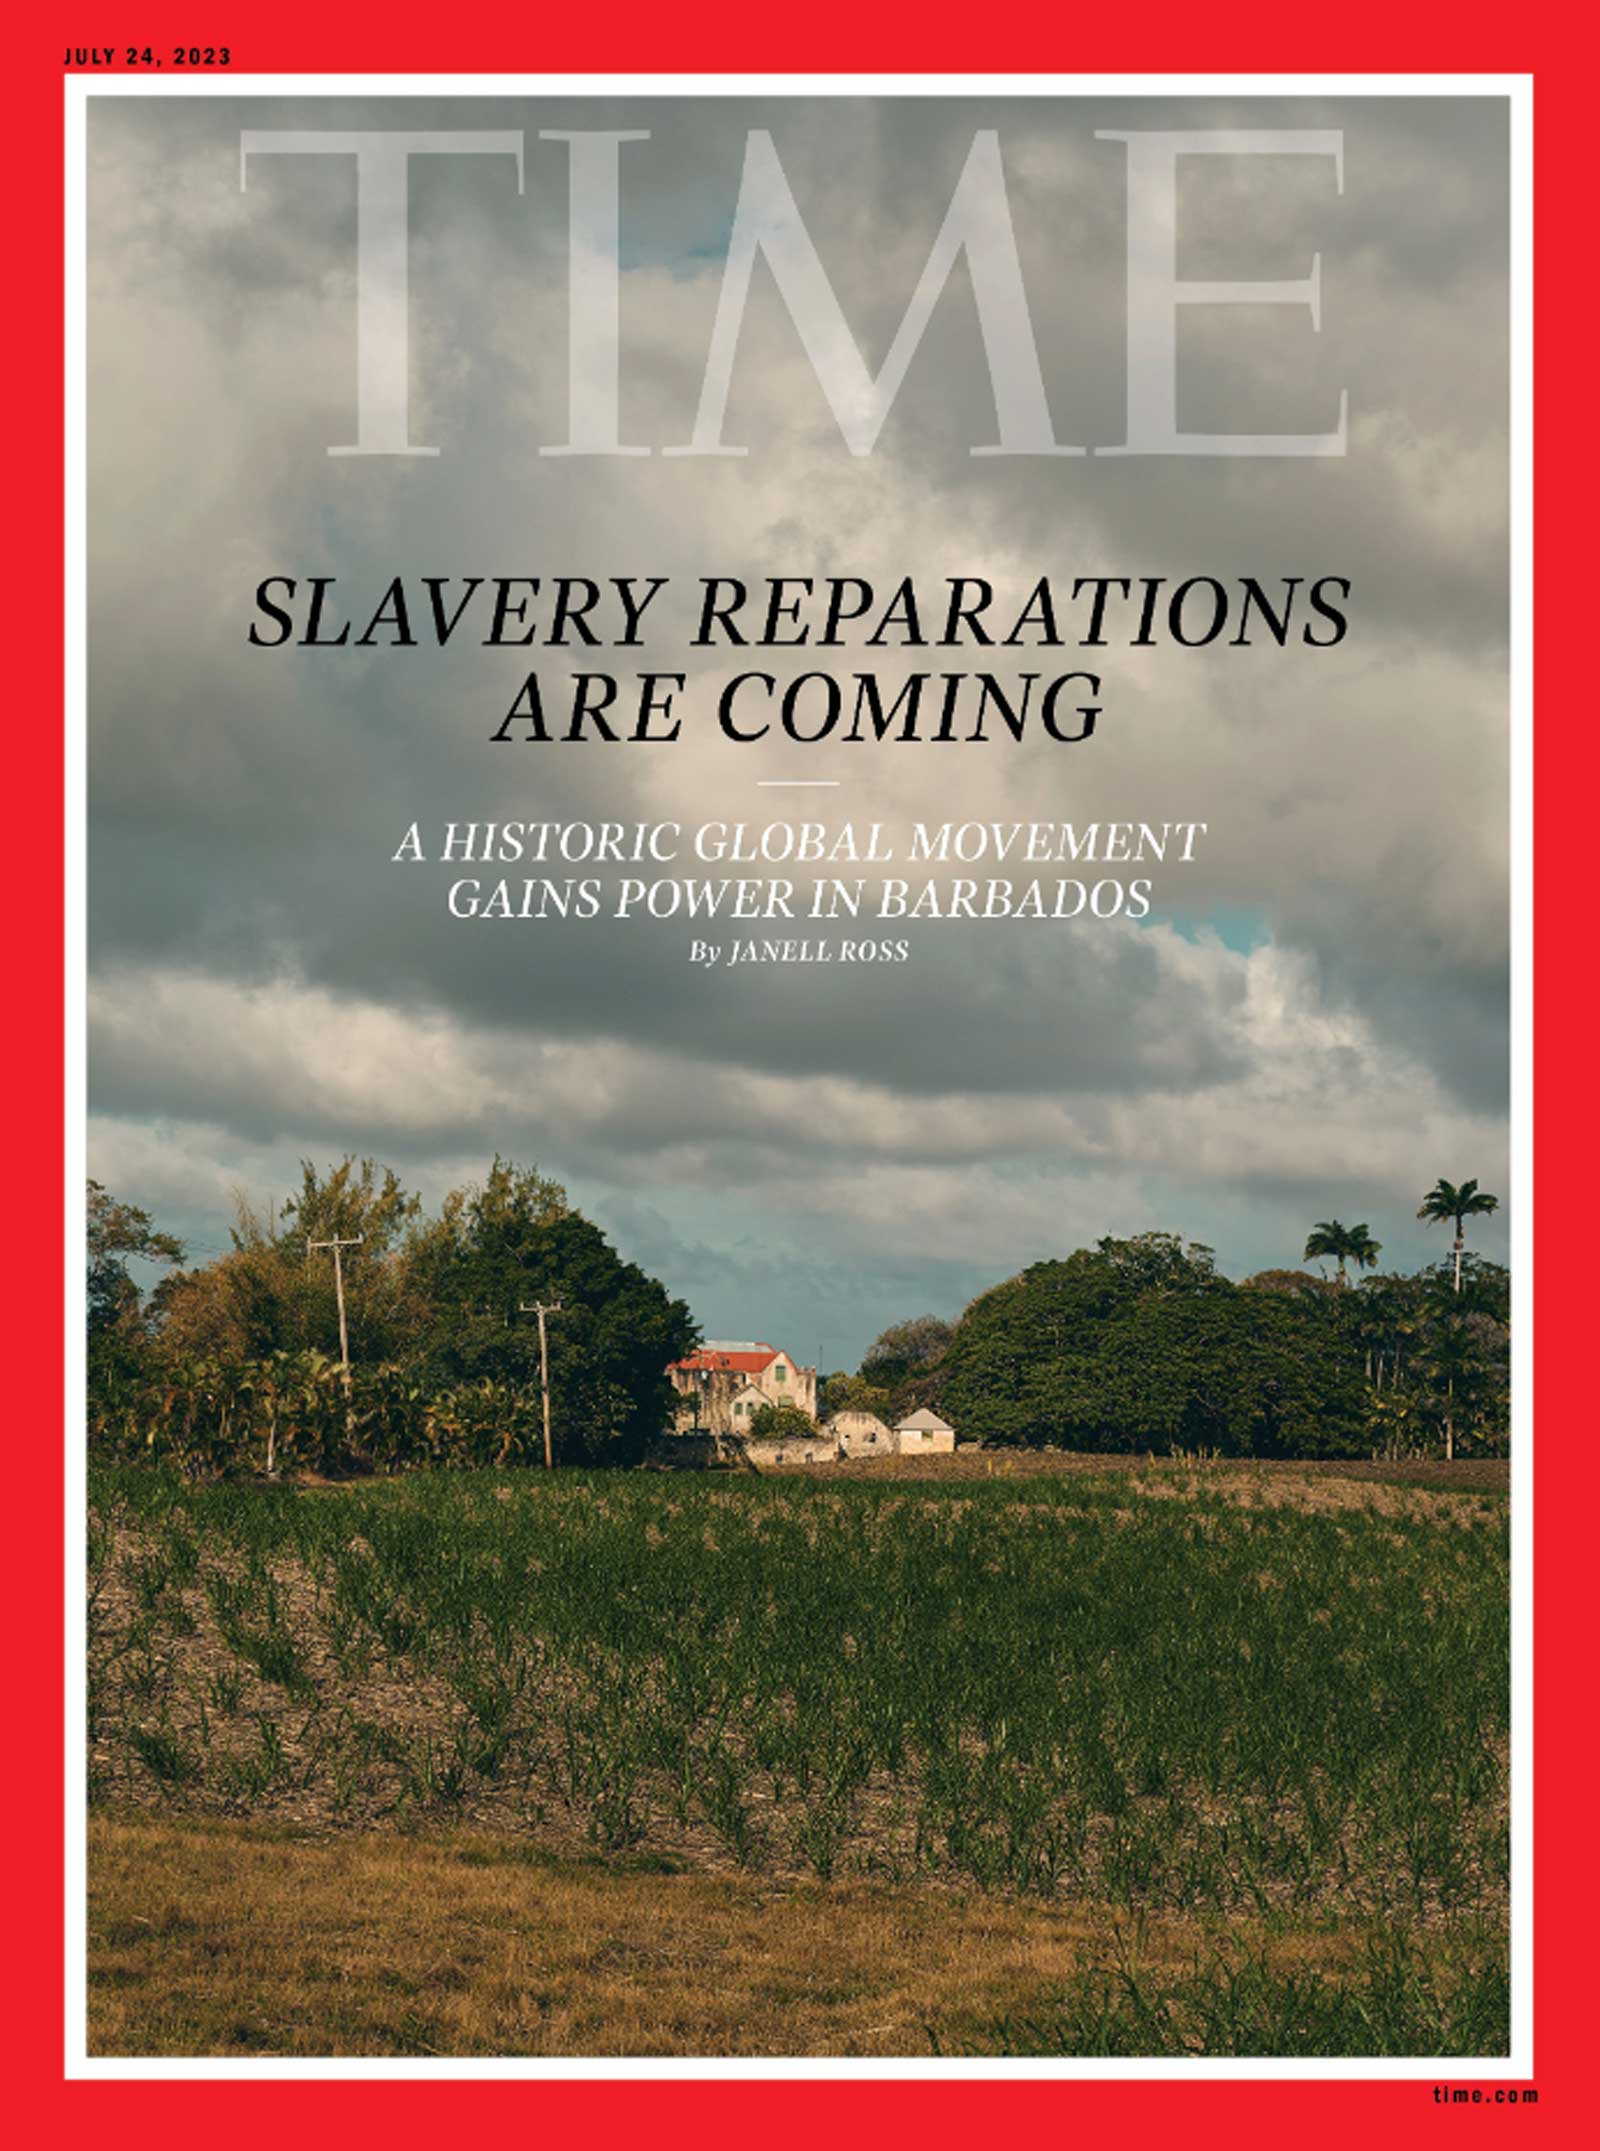 TIME magazine cover - Photograph by Christopher Gregory-Rivera for TIME